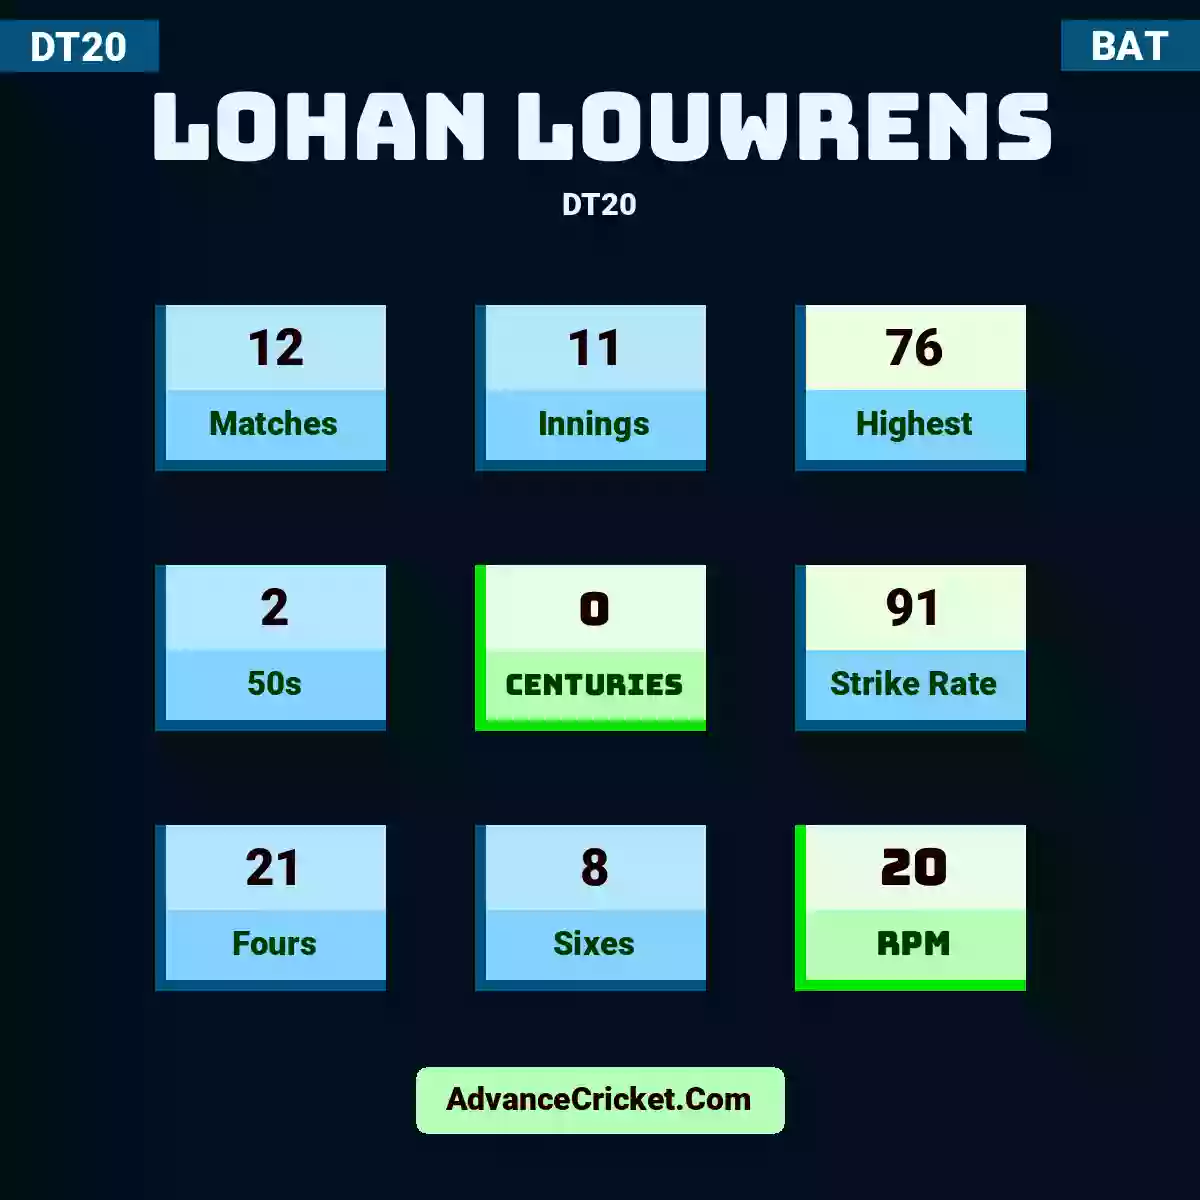 Lohan Louwrens DT20 , Lohan Louwrens played 12 matches, scored 76 runs as highest, 2 half-centuries, and 0 centuries, with a strike rate of 91. l.louwrens hit 21 fours and 8 sixes, with an RPM of 20.